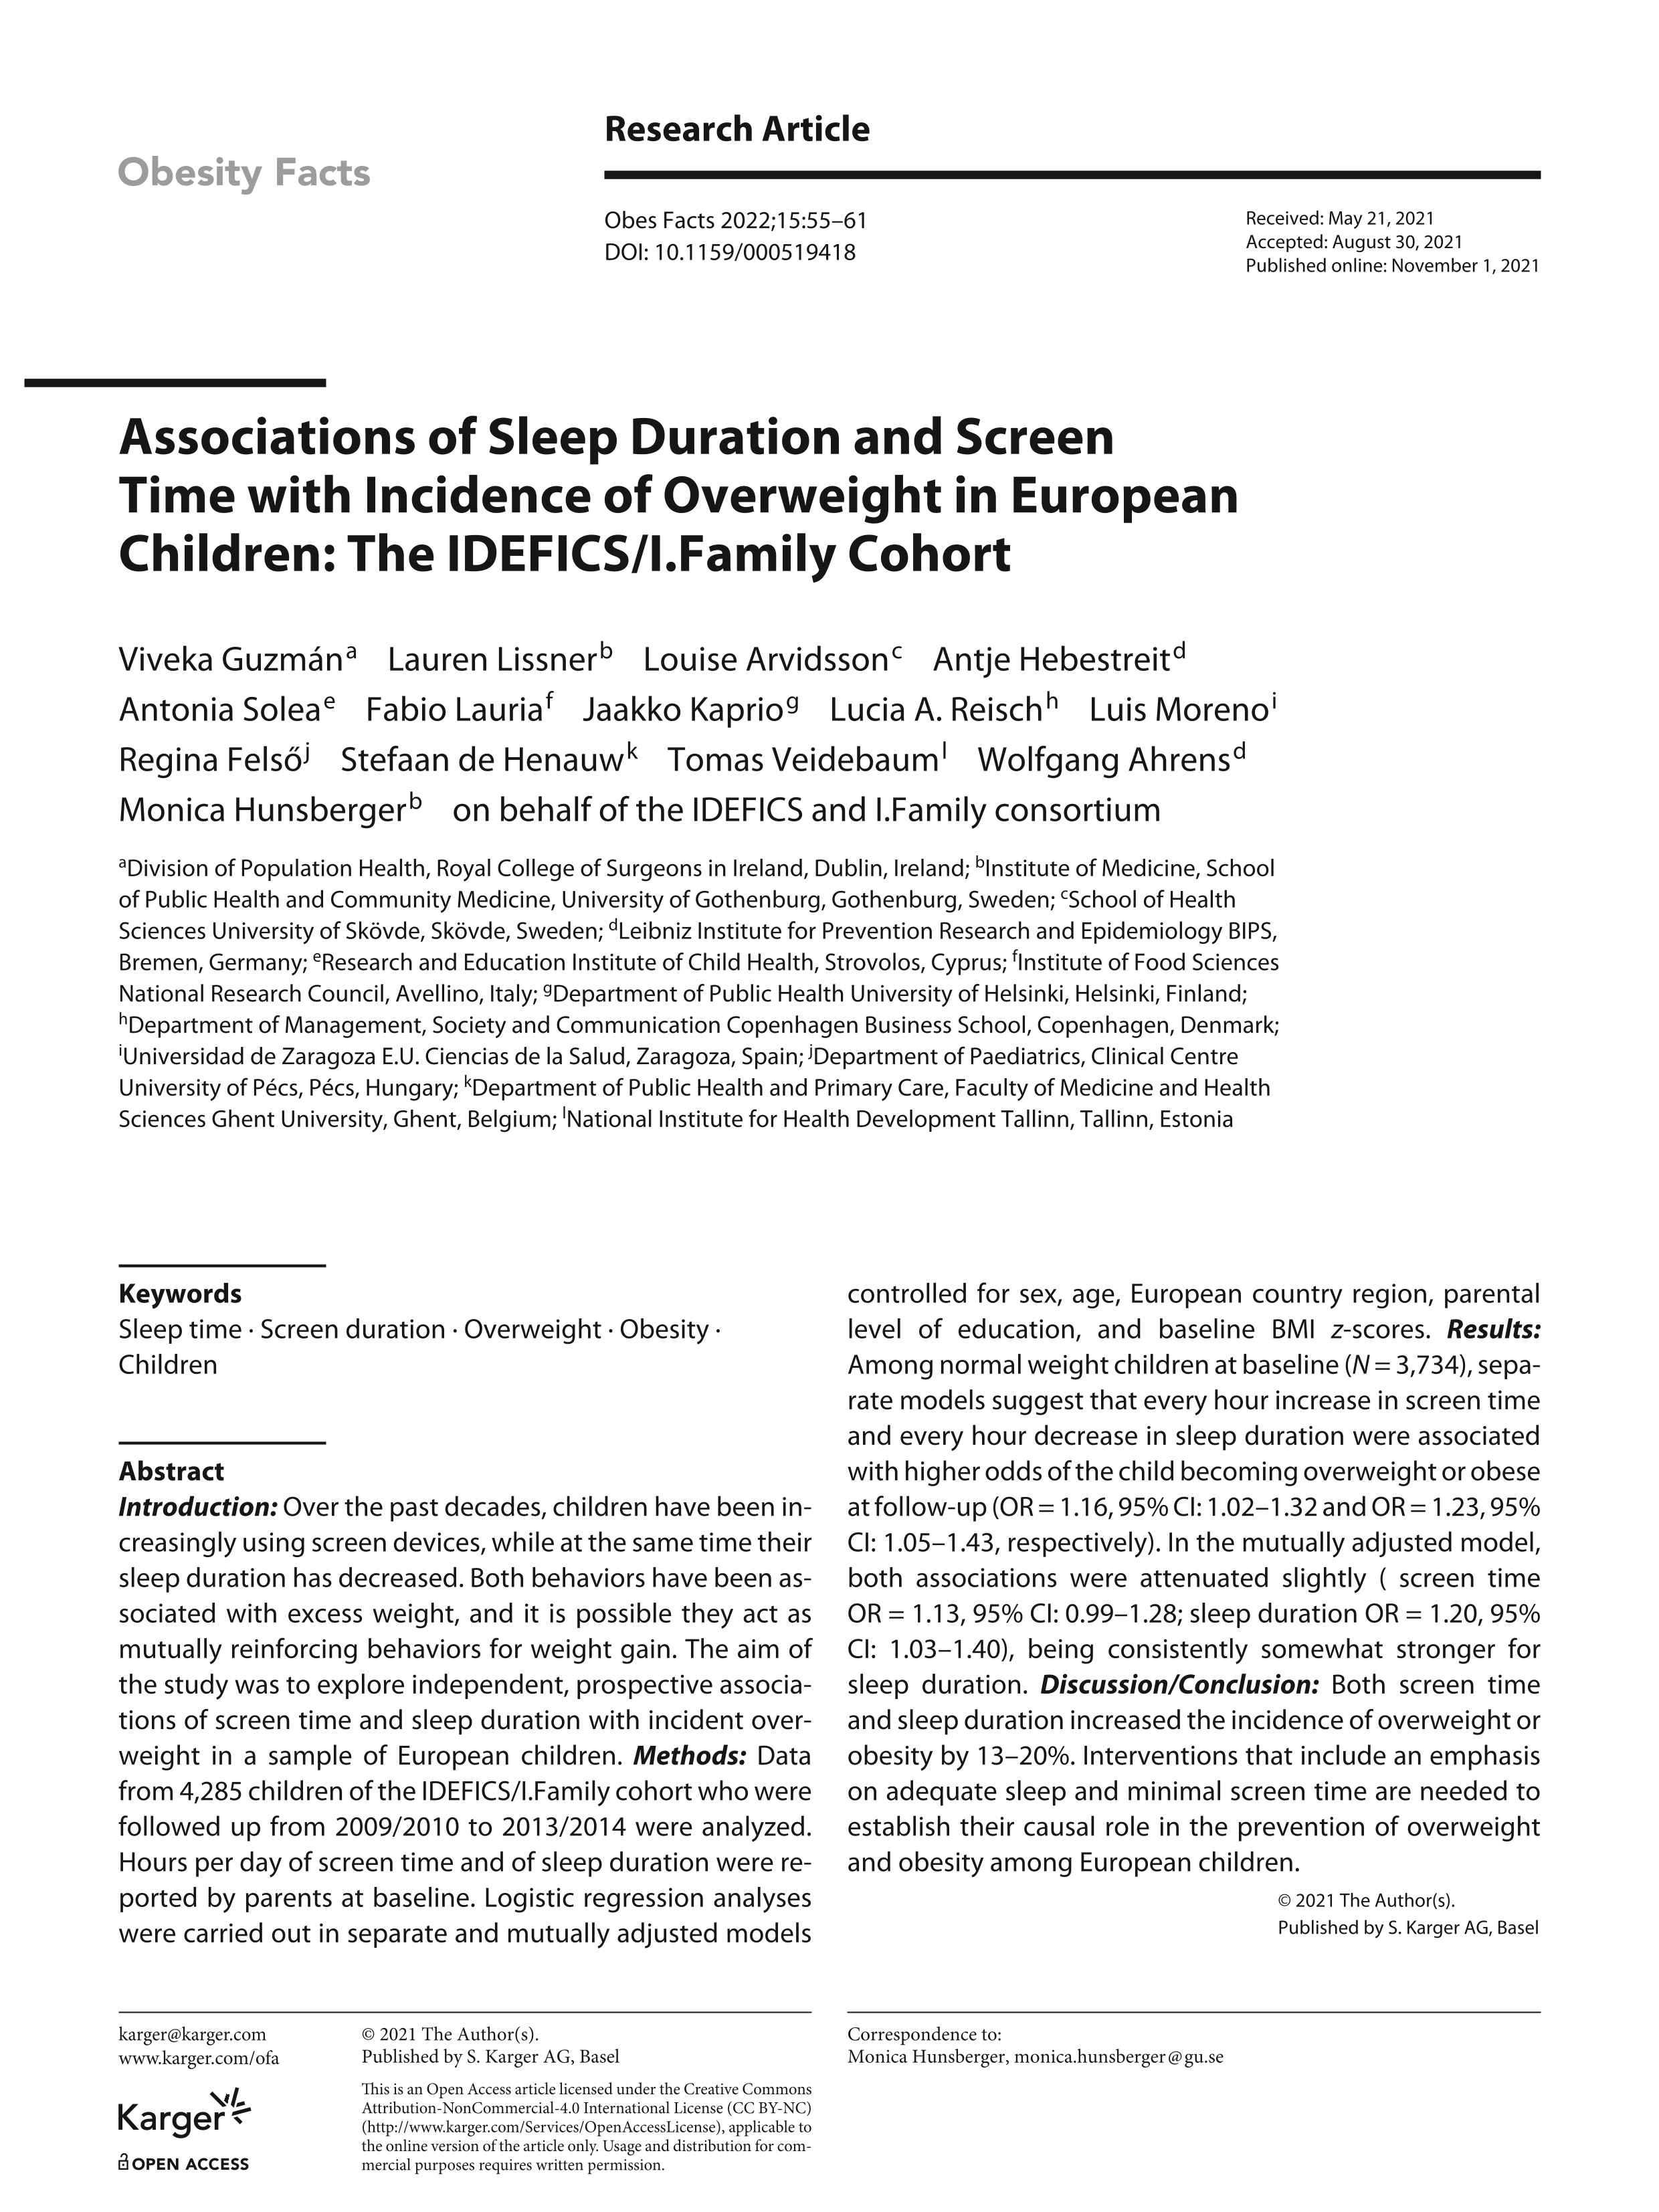 Associations of Sleep Duration and Screen Time with Incidence of Overweight in European Children: The IDEFICS/I.Family Cohort